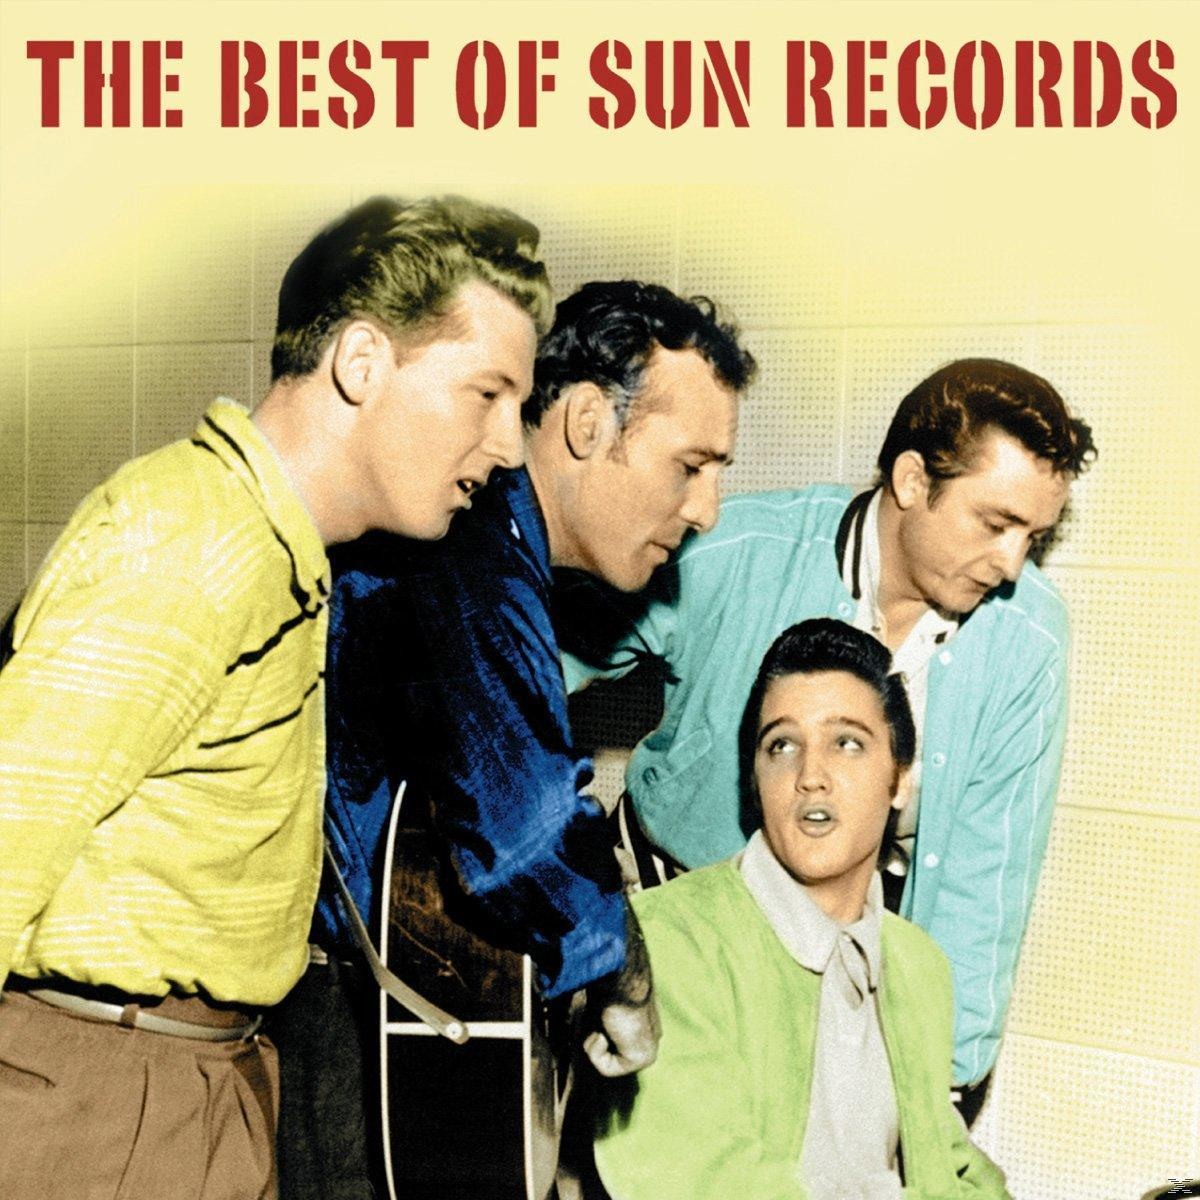 The - Of Best (CD) Records VARIOUS - SUN